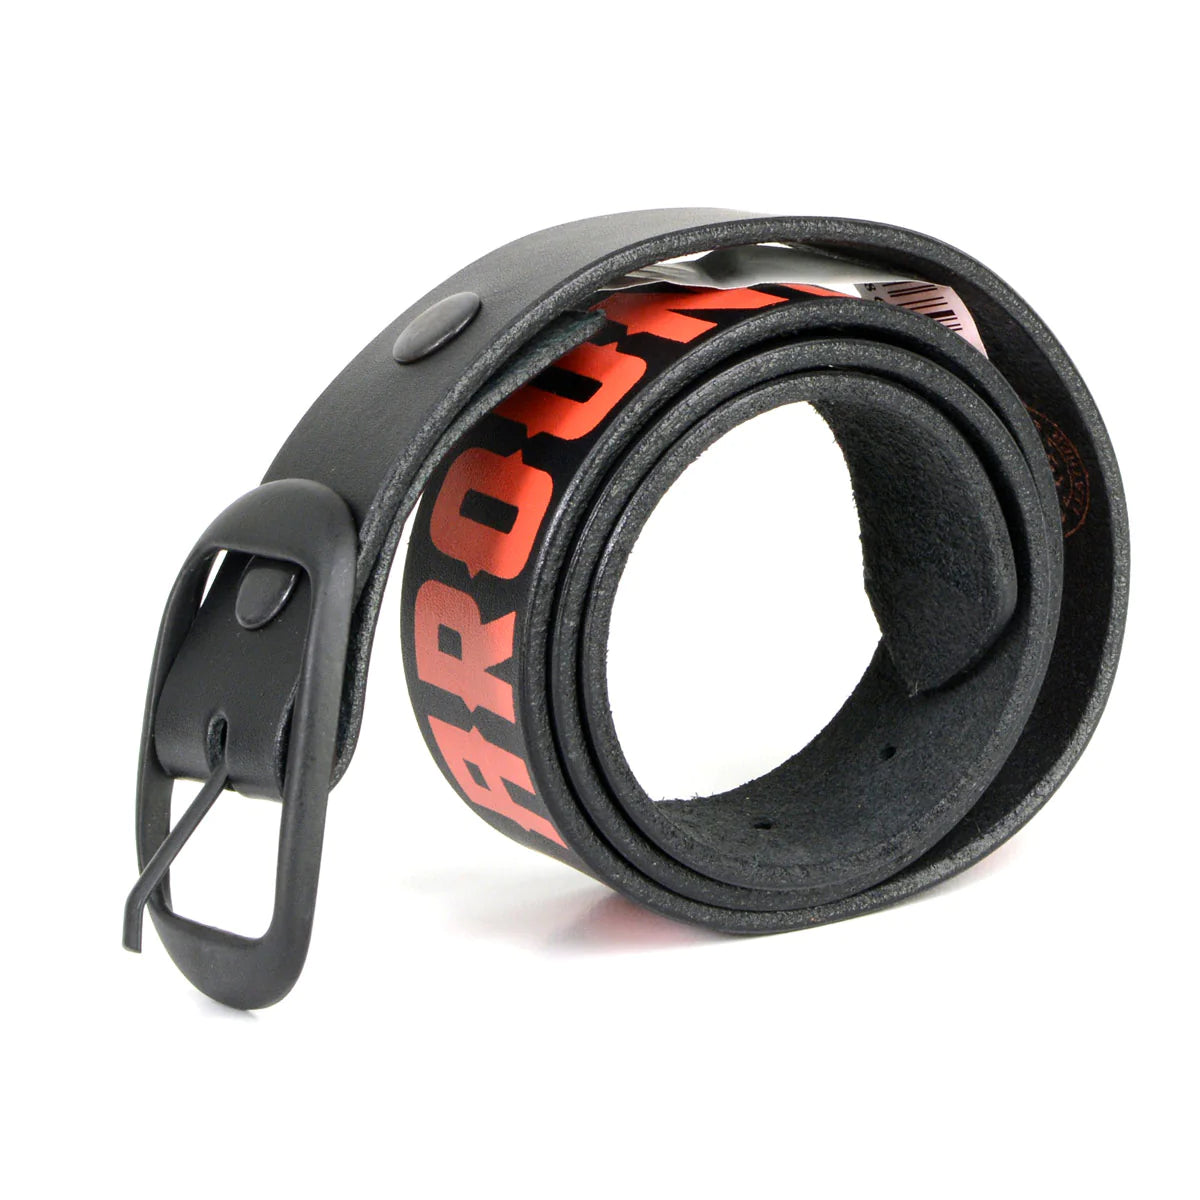 Men's F* Around - Find Out Black Genuine Leather Belt with Interchangeable Buckle - 1.5 inches Wide